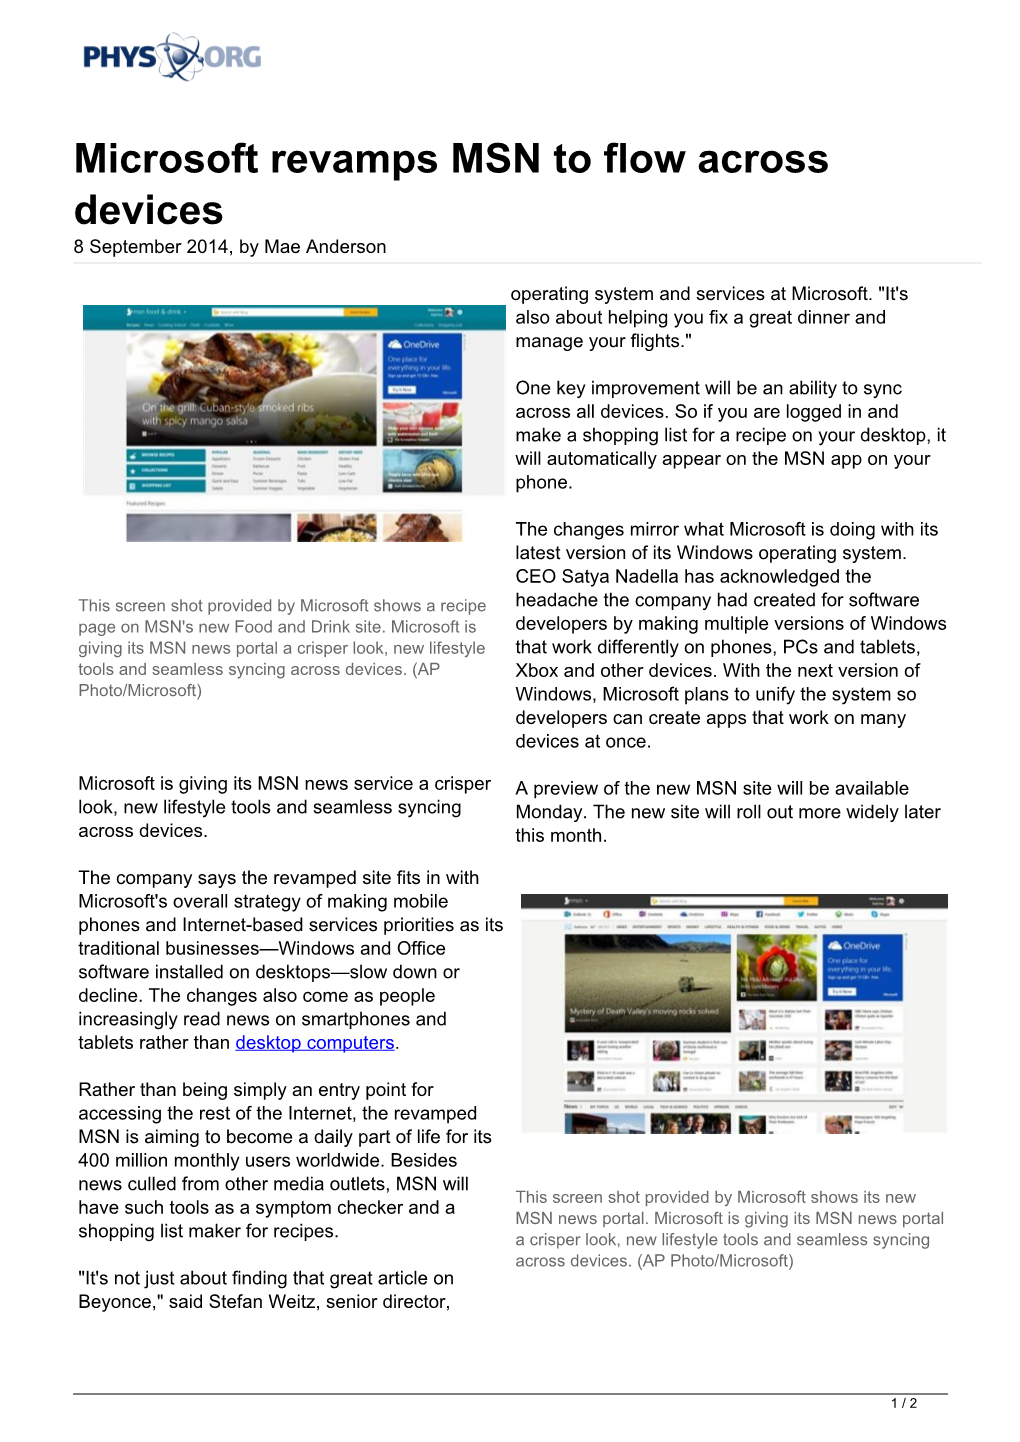 Microsoft Revamps MSN to Flow Across Devices 8 September 2014, by Mae Anderson